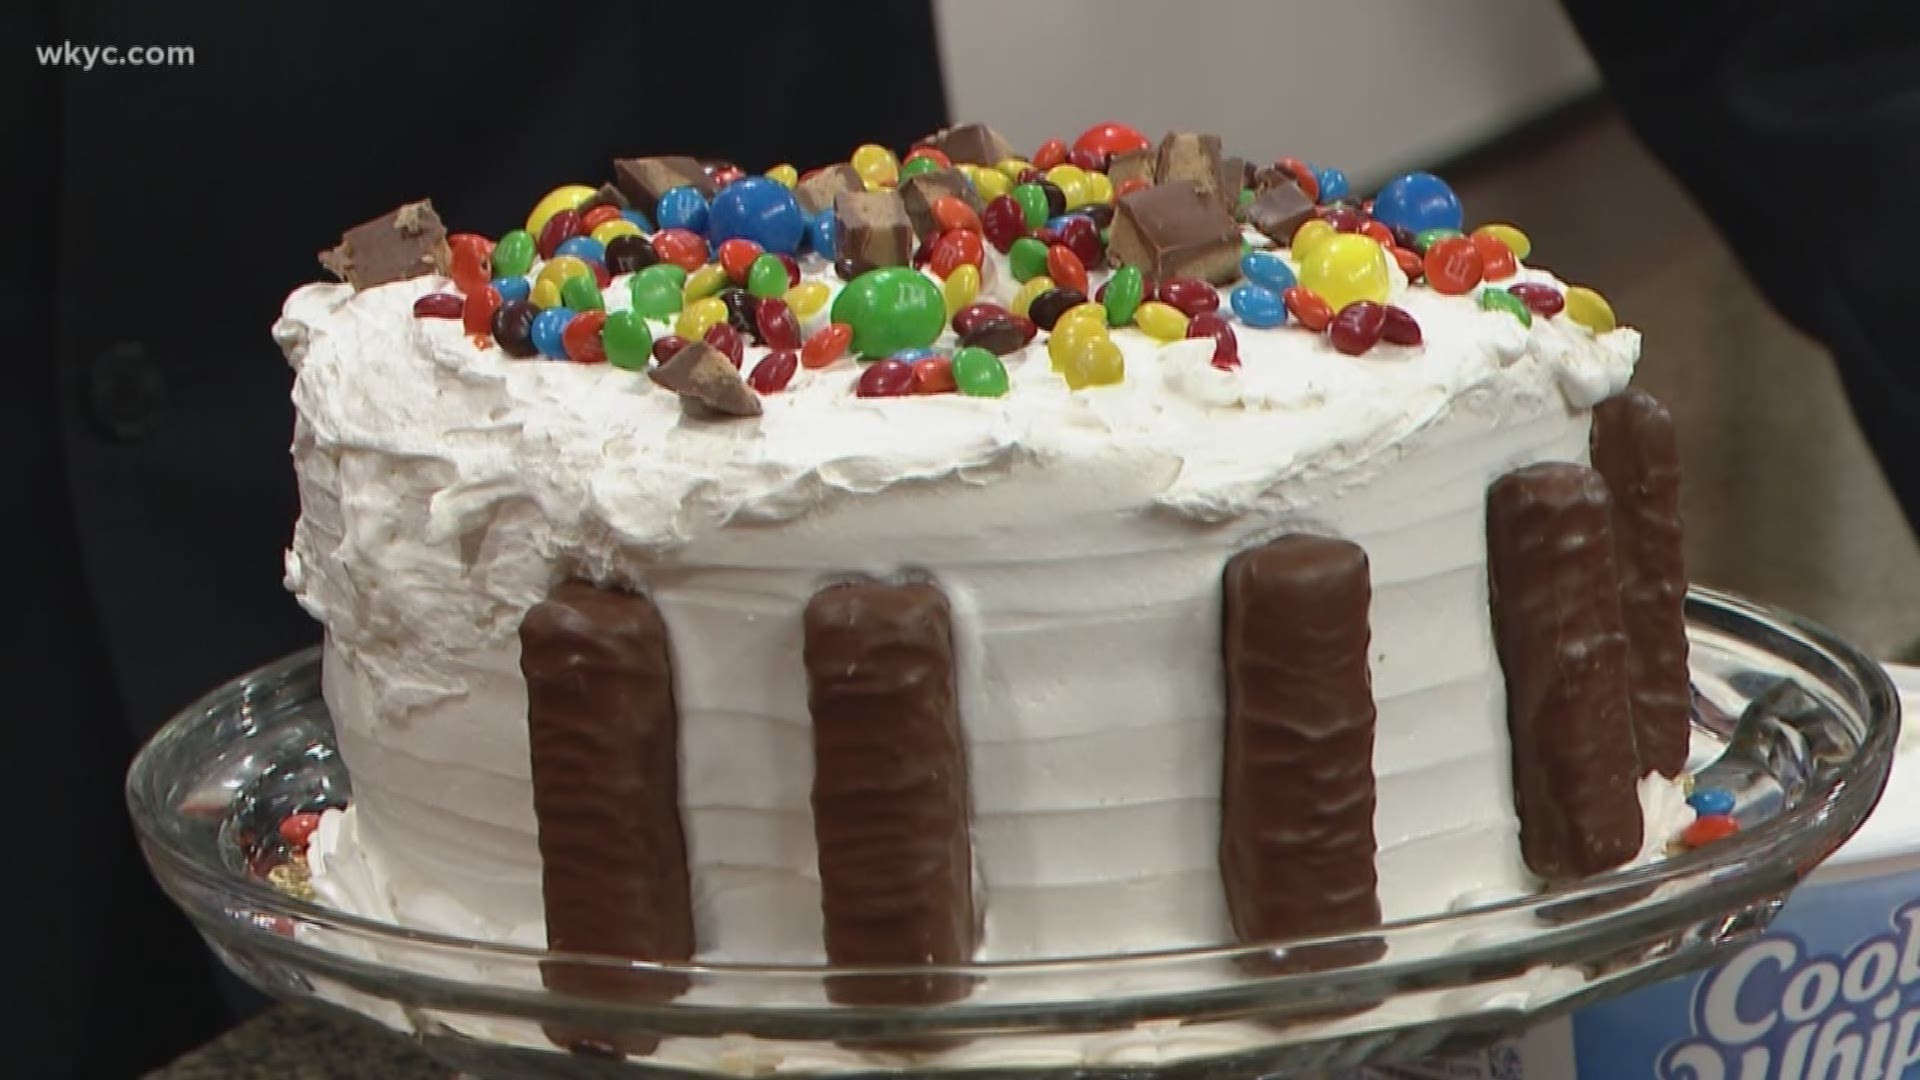 Nov. 1, 2018: What are you going to do with all that Halloween candy? Hollie Strano shows us how to make her special candy cake.